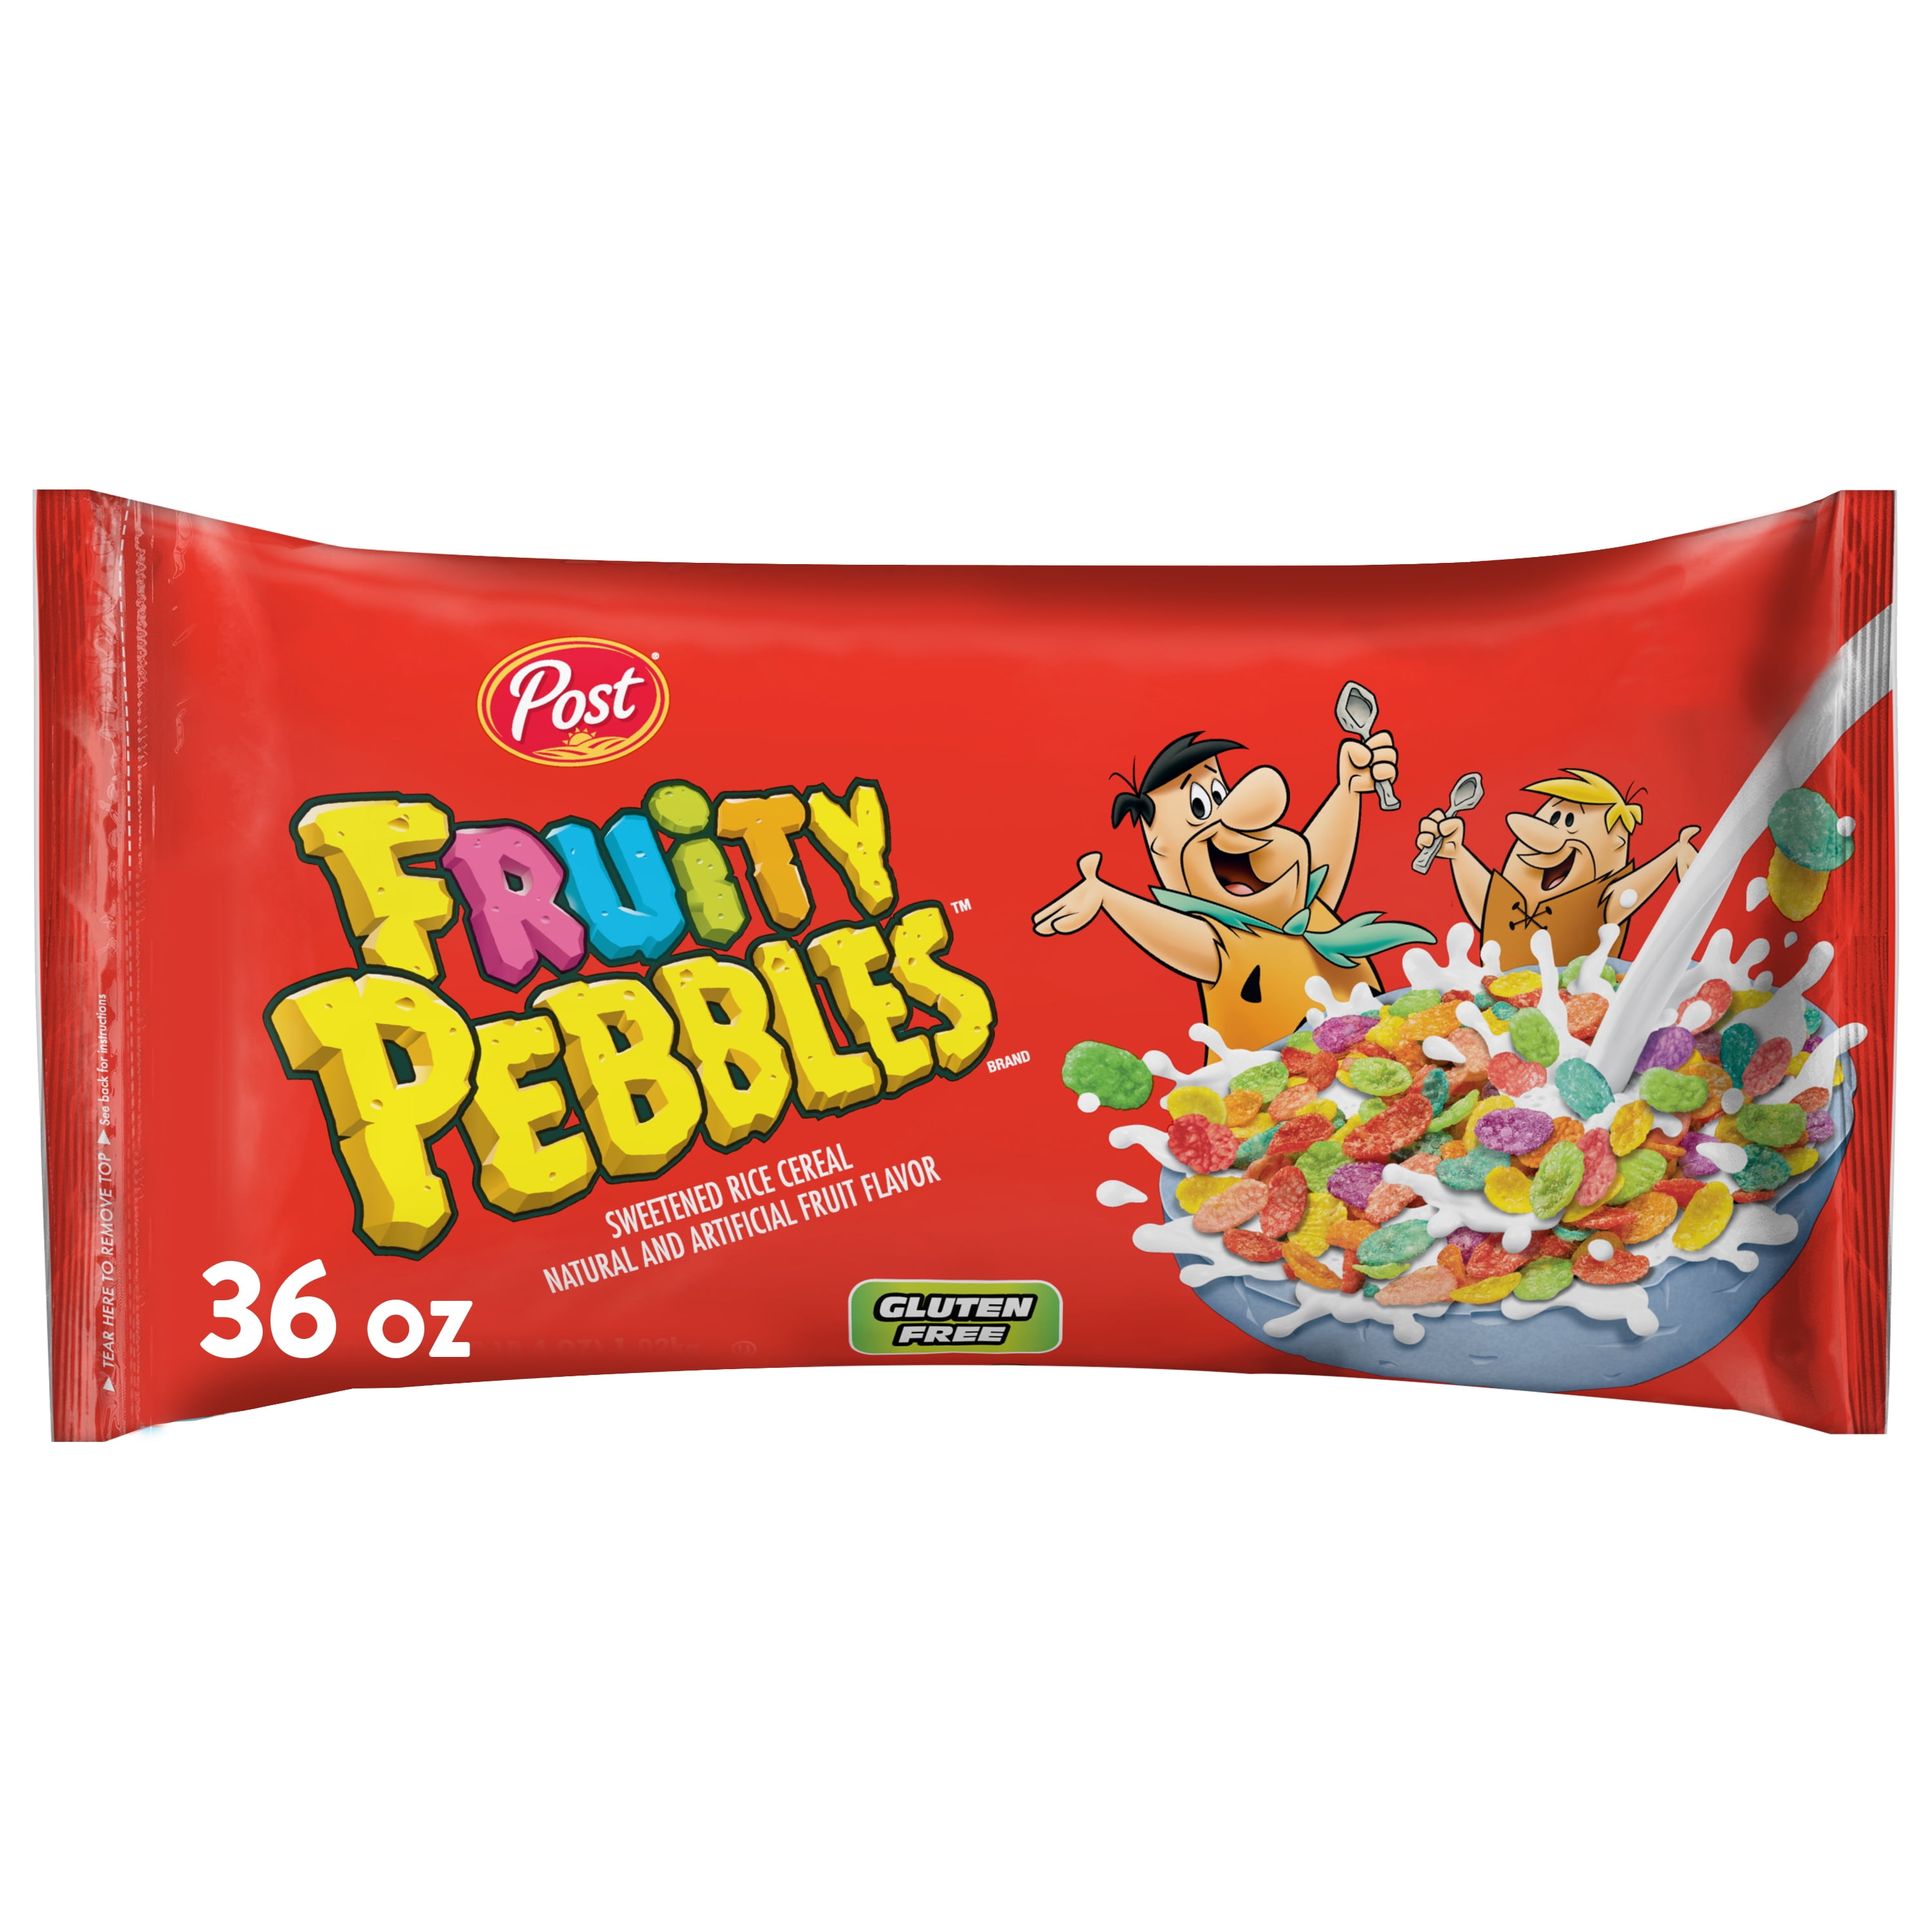 Post Fruity PEBBLES Breakfast Cereal, Gluten Free, 10  Vitamins and Minerals, Breakfast Snacks, Sweetened Rice Cereal, 36 Oz